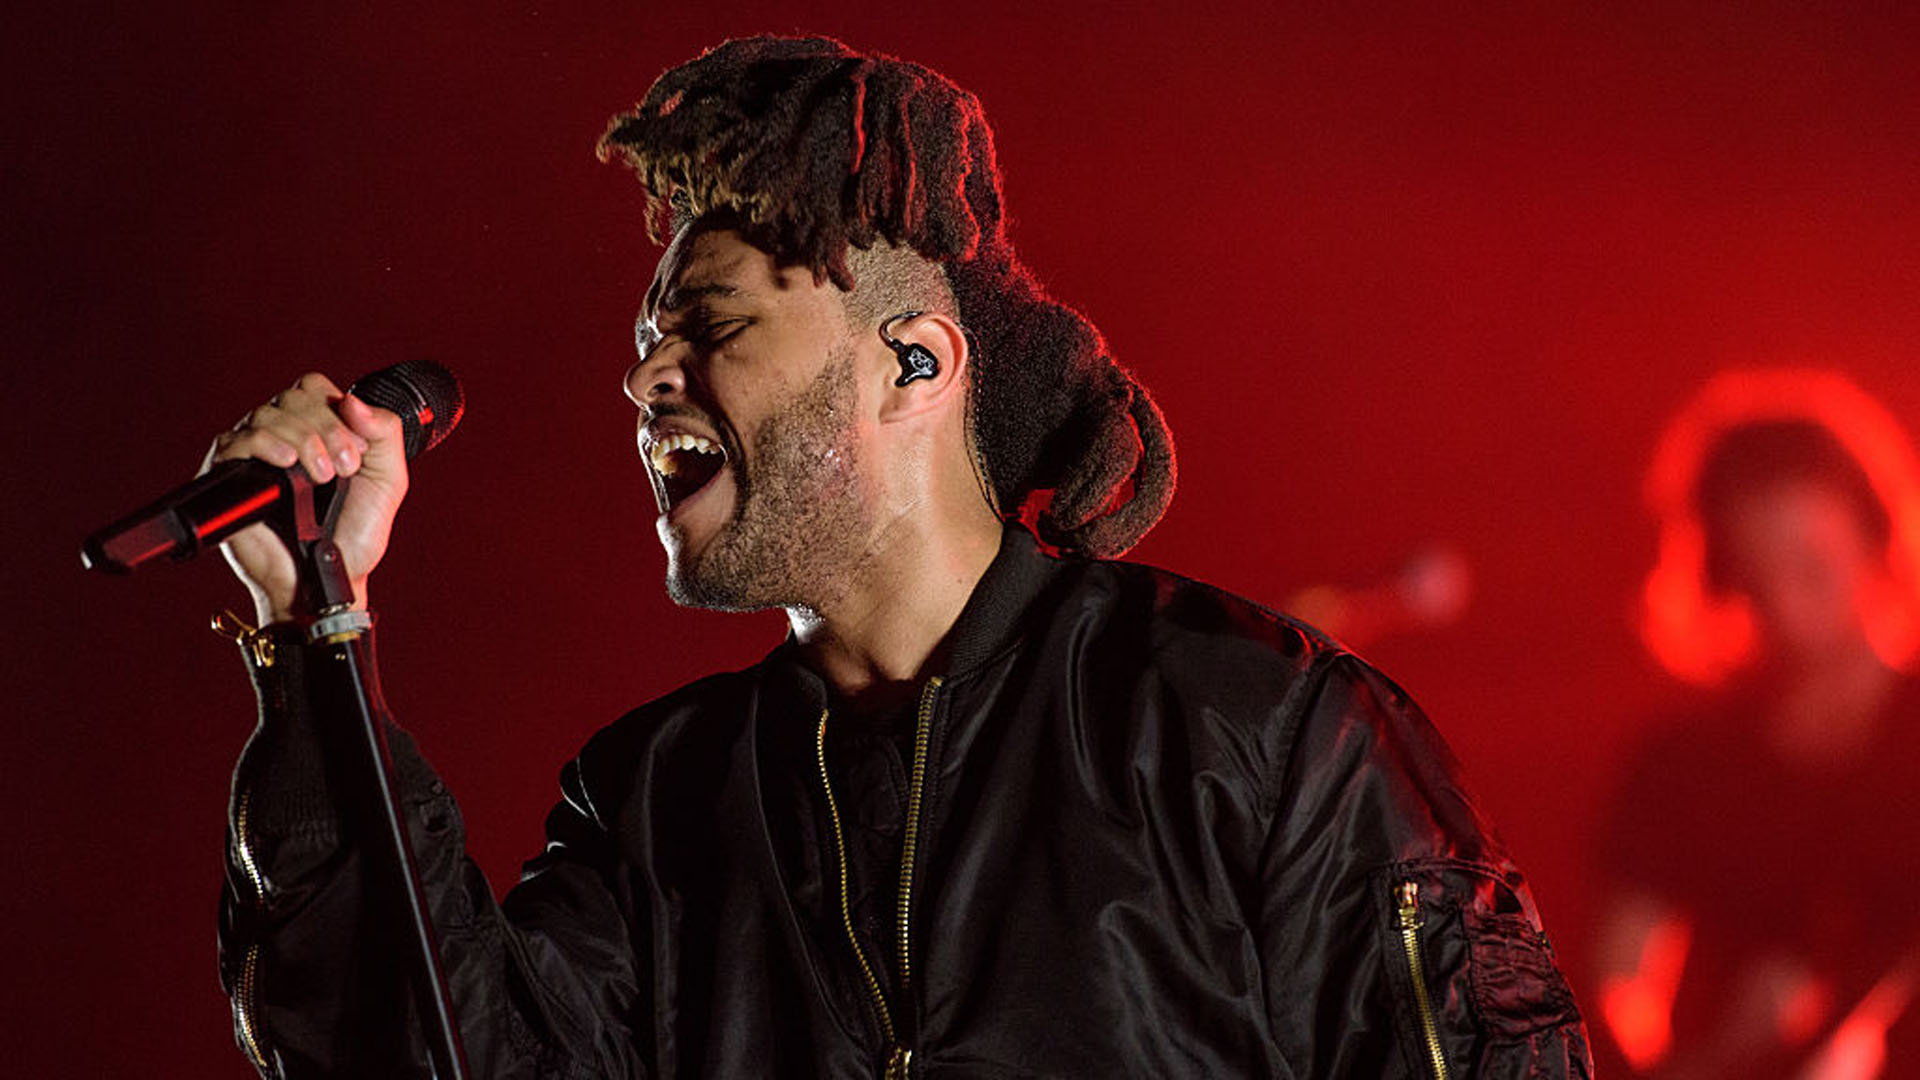 WANTAGH, NY - AUGUST 22: The Weeknd performs live during the 2015 Billboard Hot 100 Music Festival at Nikon at Jones Beach Theater on August 22, 2015 in Wantagh, New York. (Photo by Matthew Eisman/Getty Images)